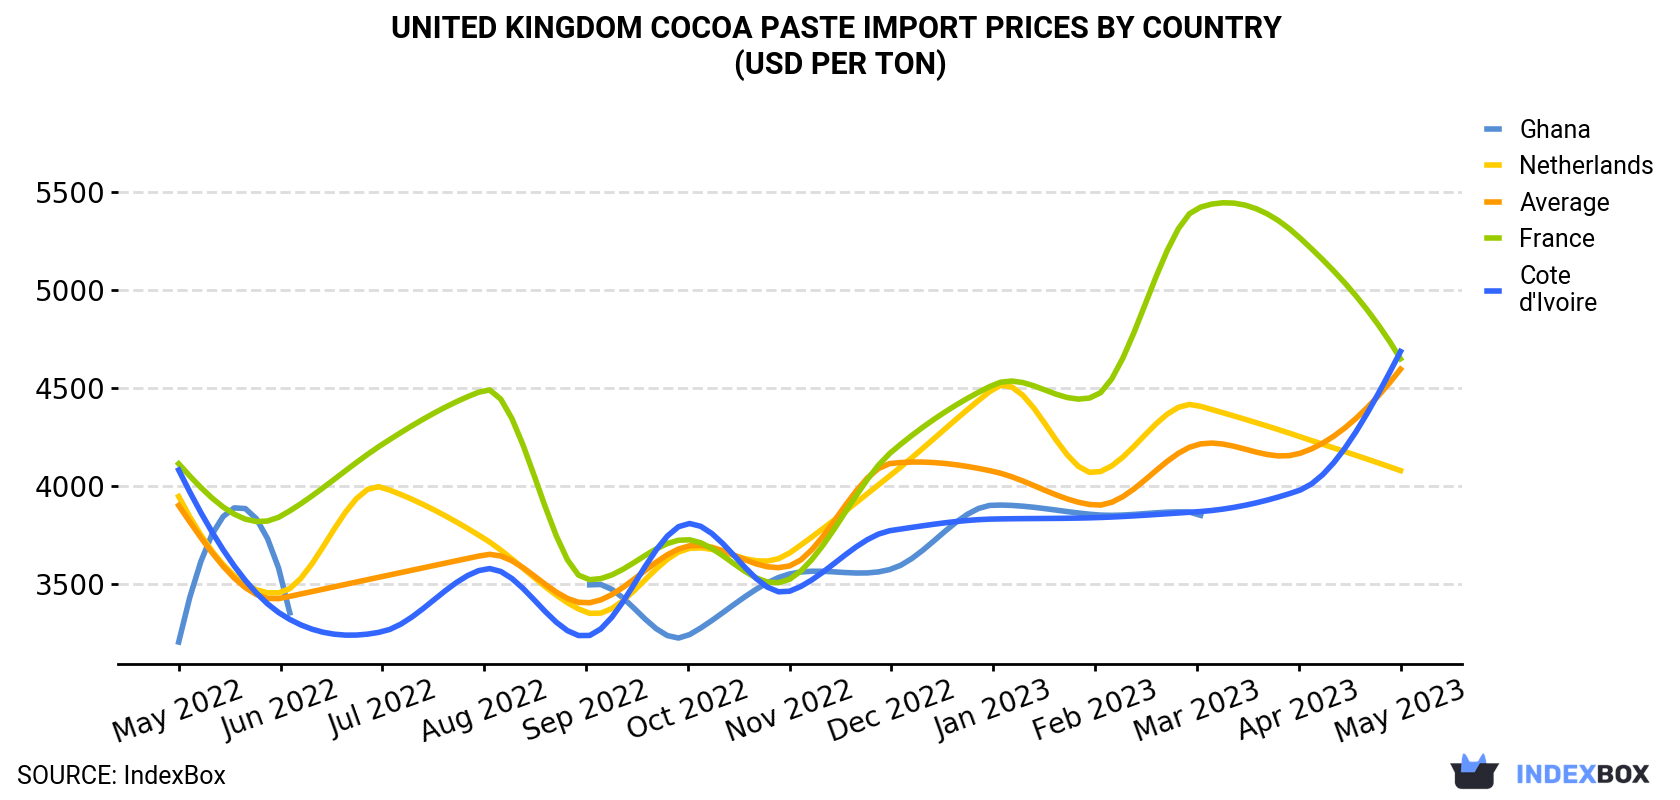 United Kingdom Cocoa Paste Import Prices By Country (USD Per Ton)